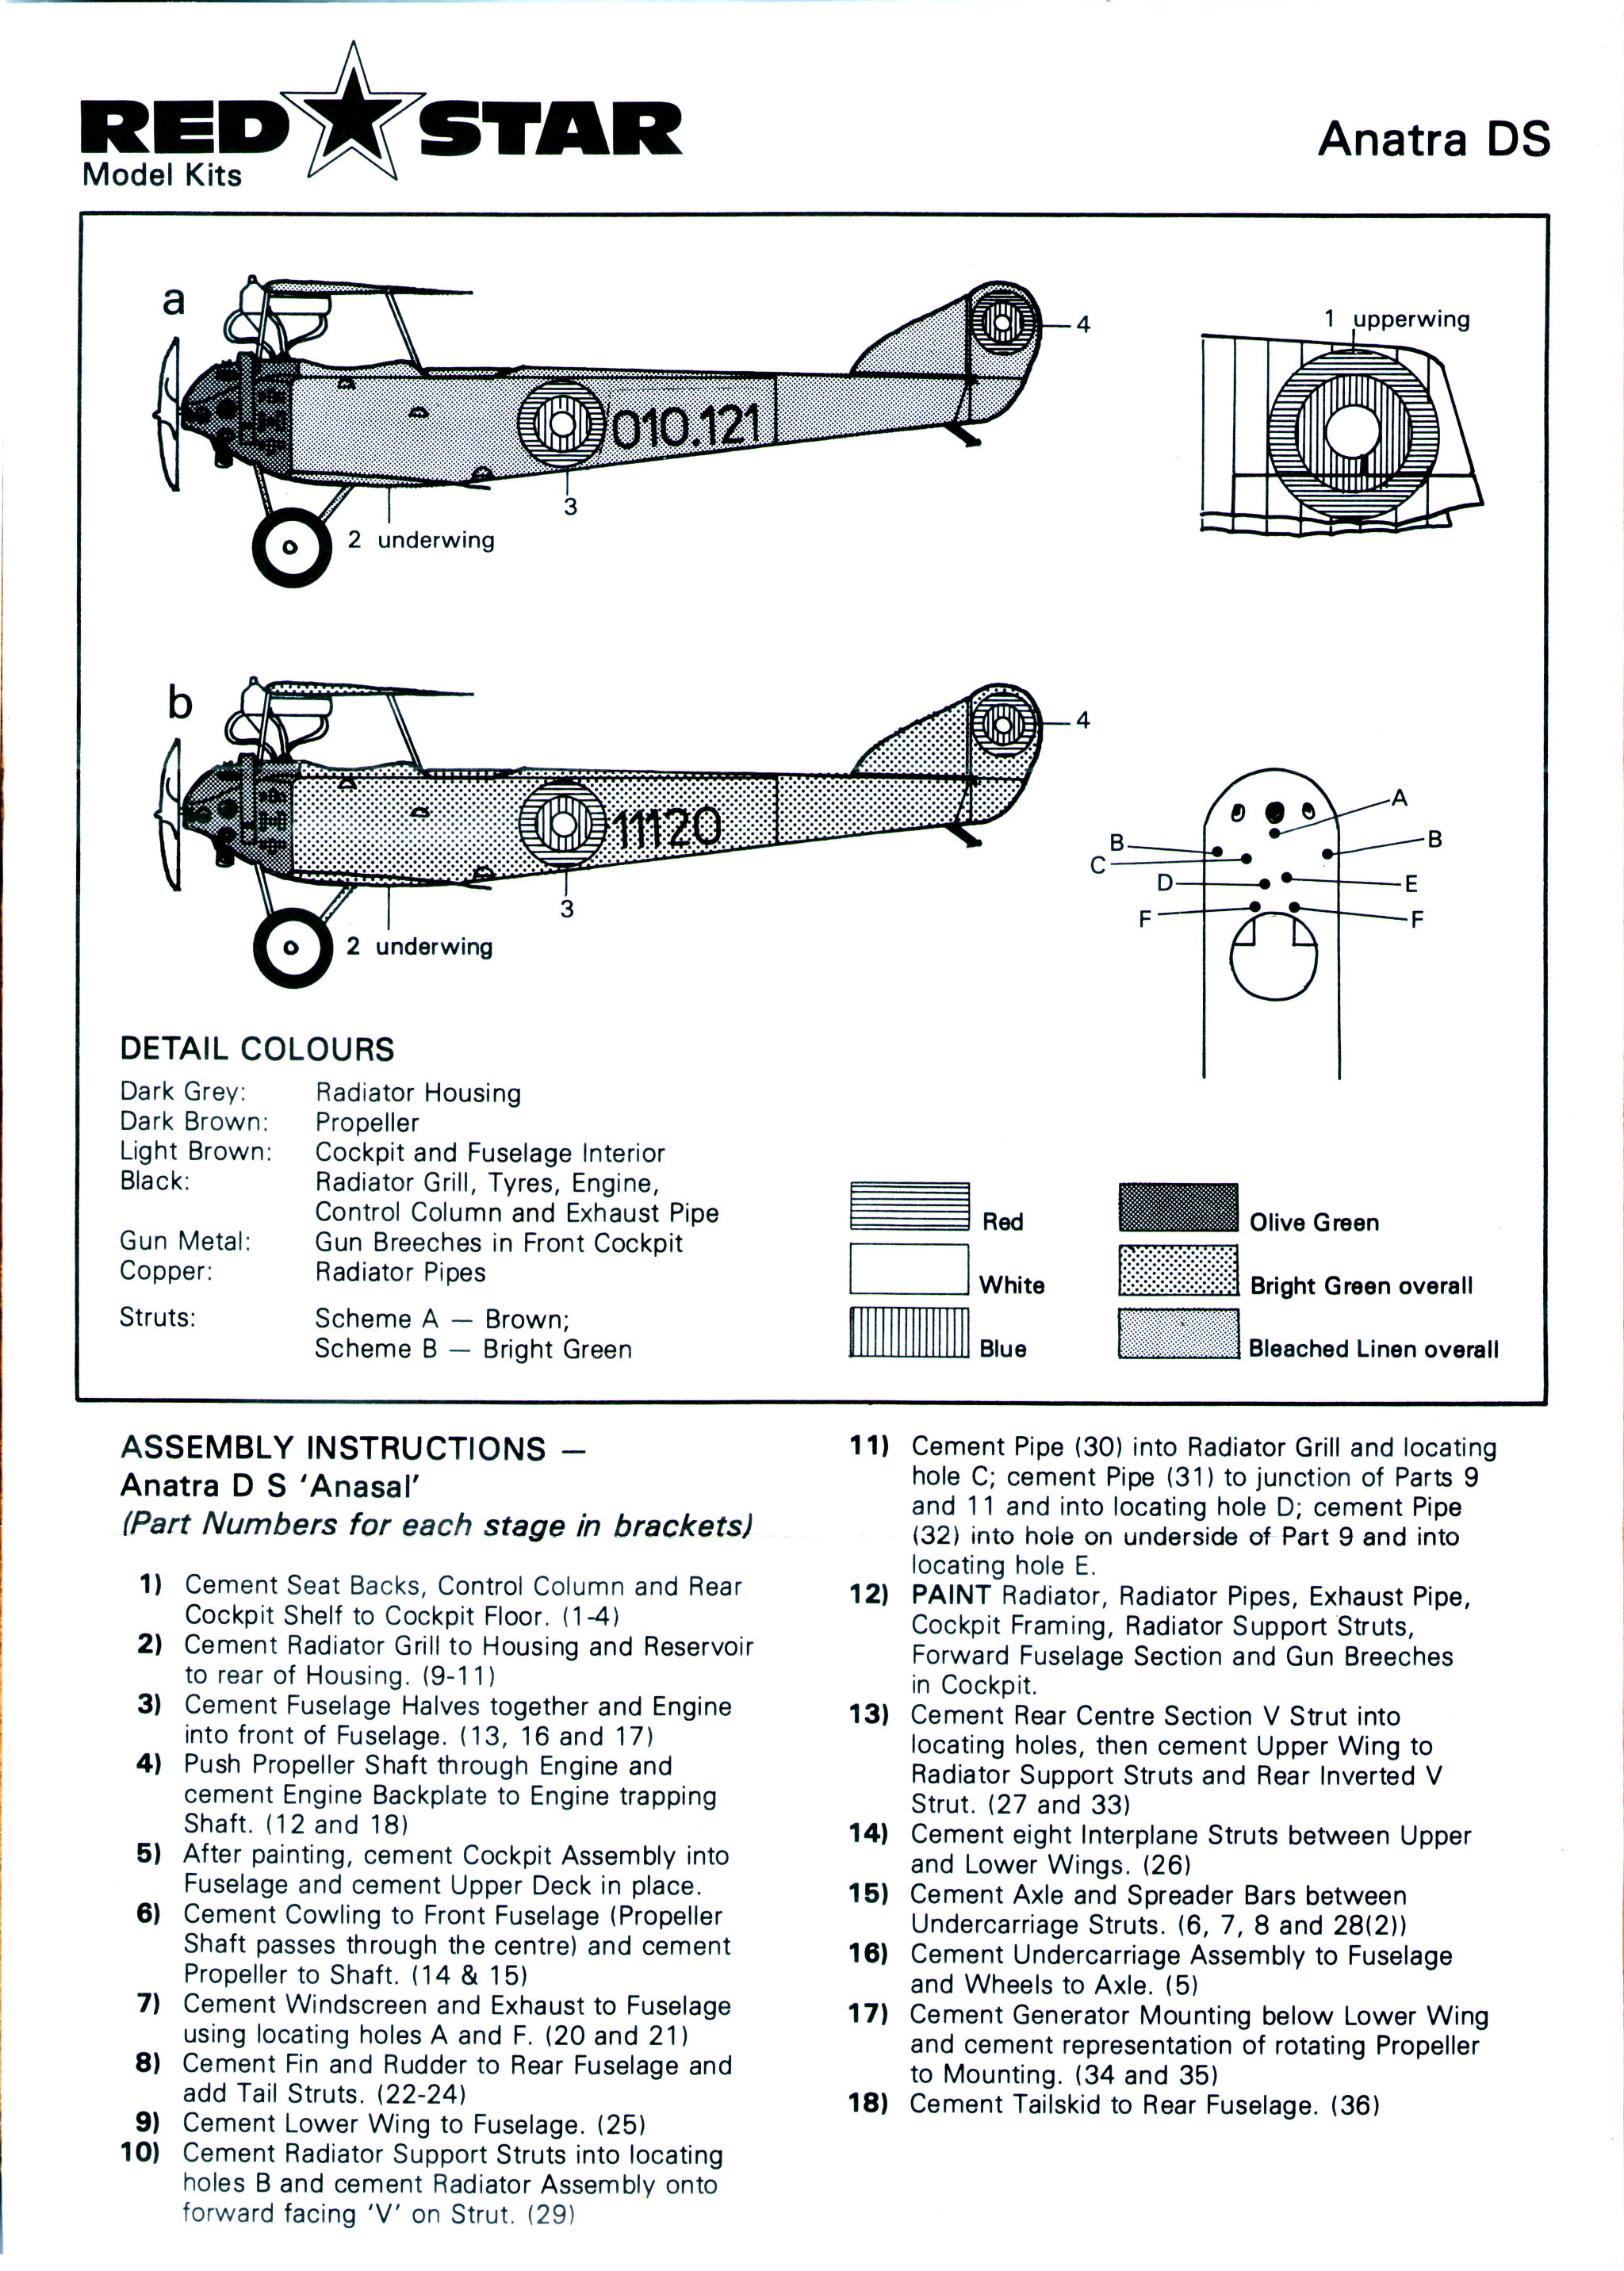 Red Star RS1/4 Anatra Anasal DS, Red Star Model Kits Ltd, 1983/4 assembly instructions for F312 Anatra